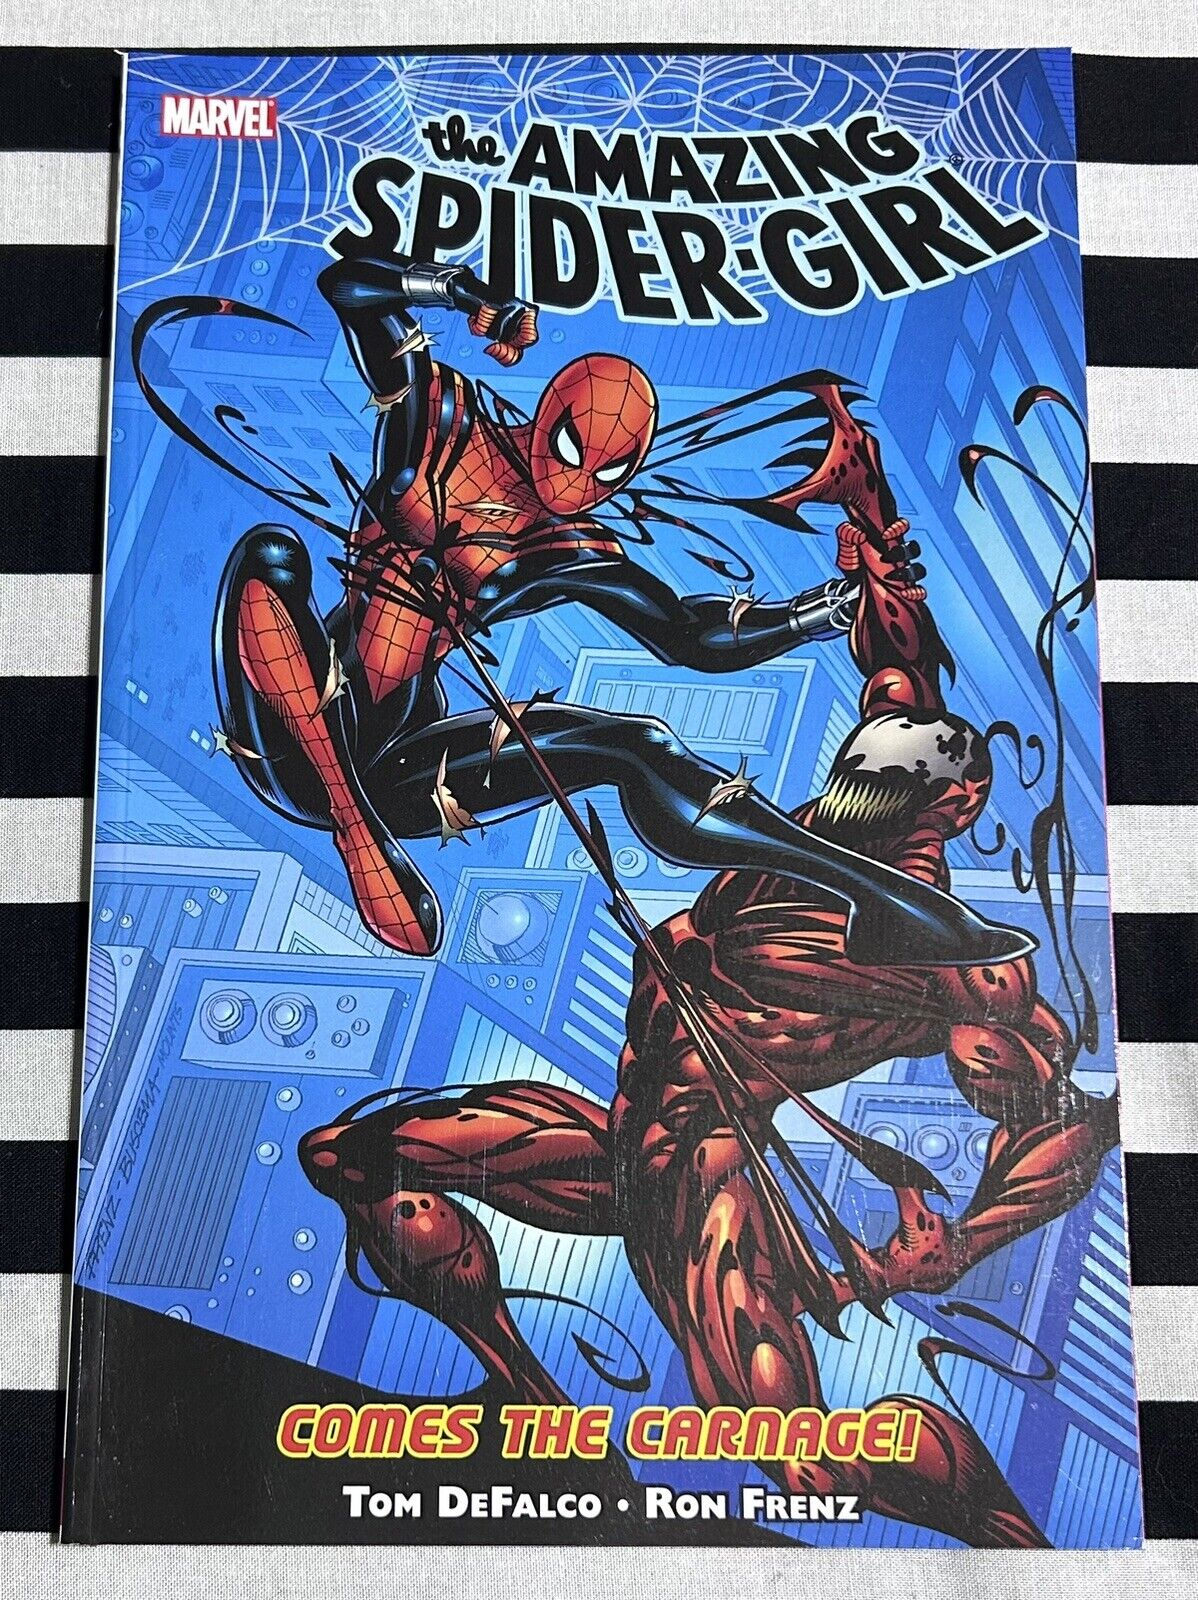 Amazing Spider-Girl 2 Comes the Carnage Trade Paperback TPB symbiote Hobgoblin